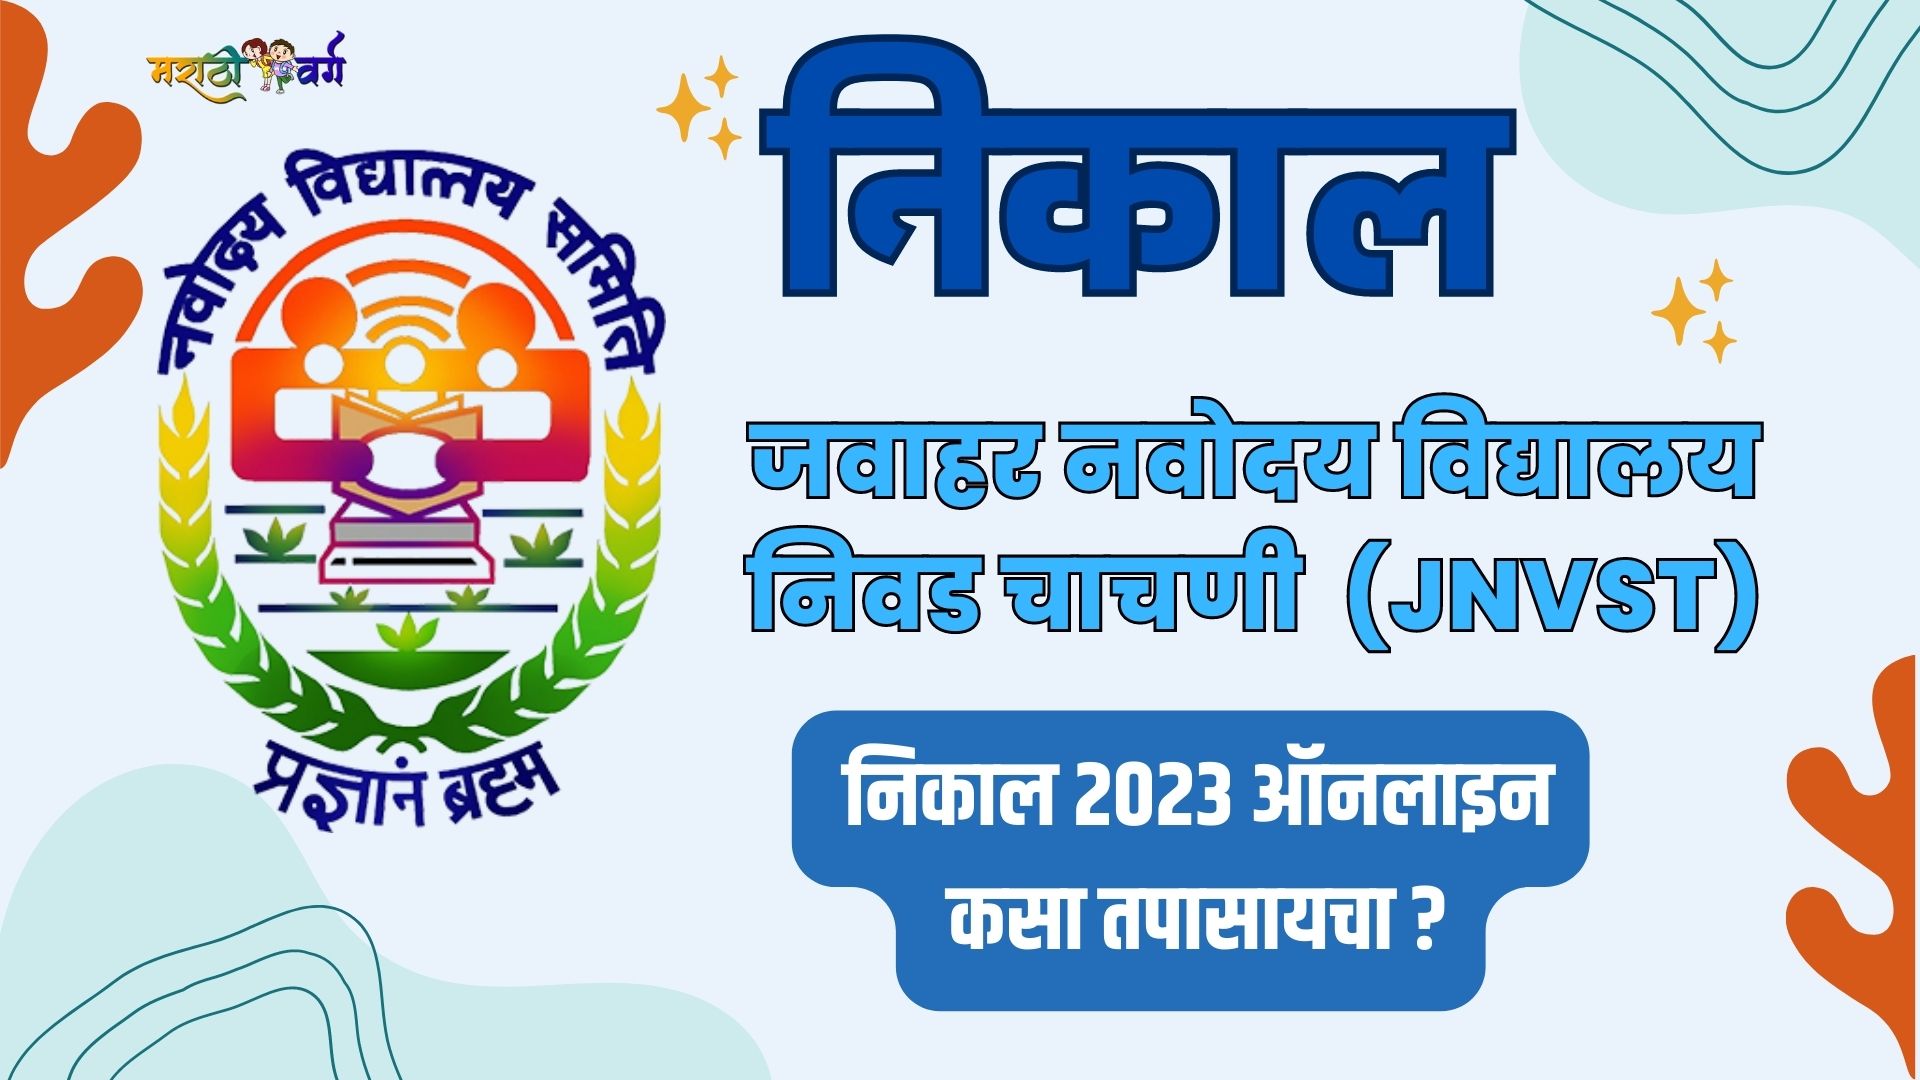 Download the JNV Class 6 Result and Cut Off at navodaya.gov.in for the Class 6 results in 2023.